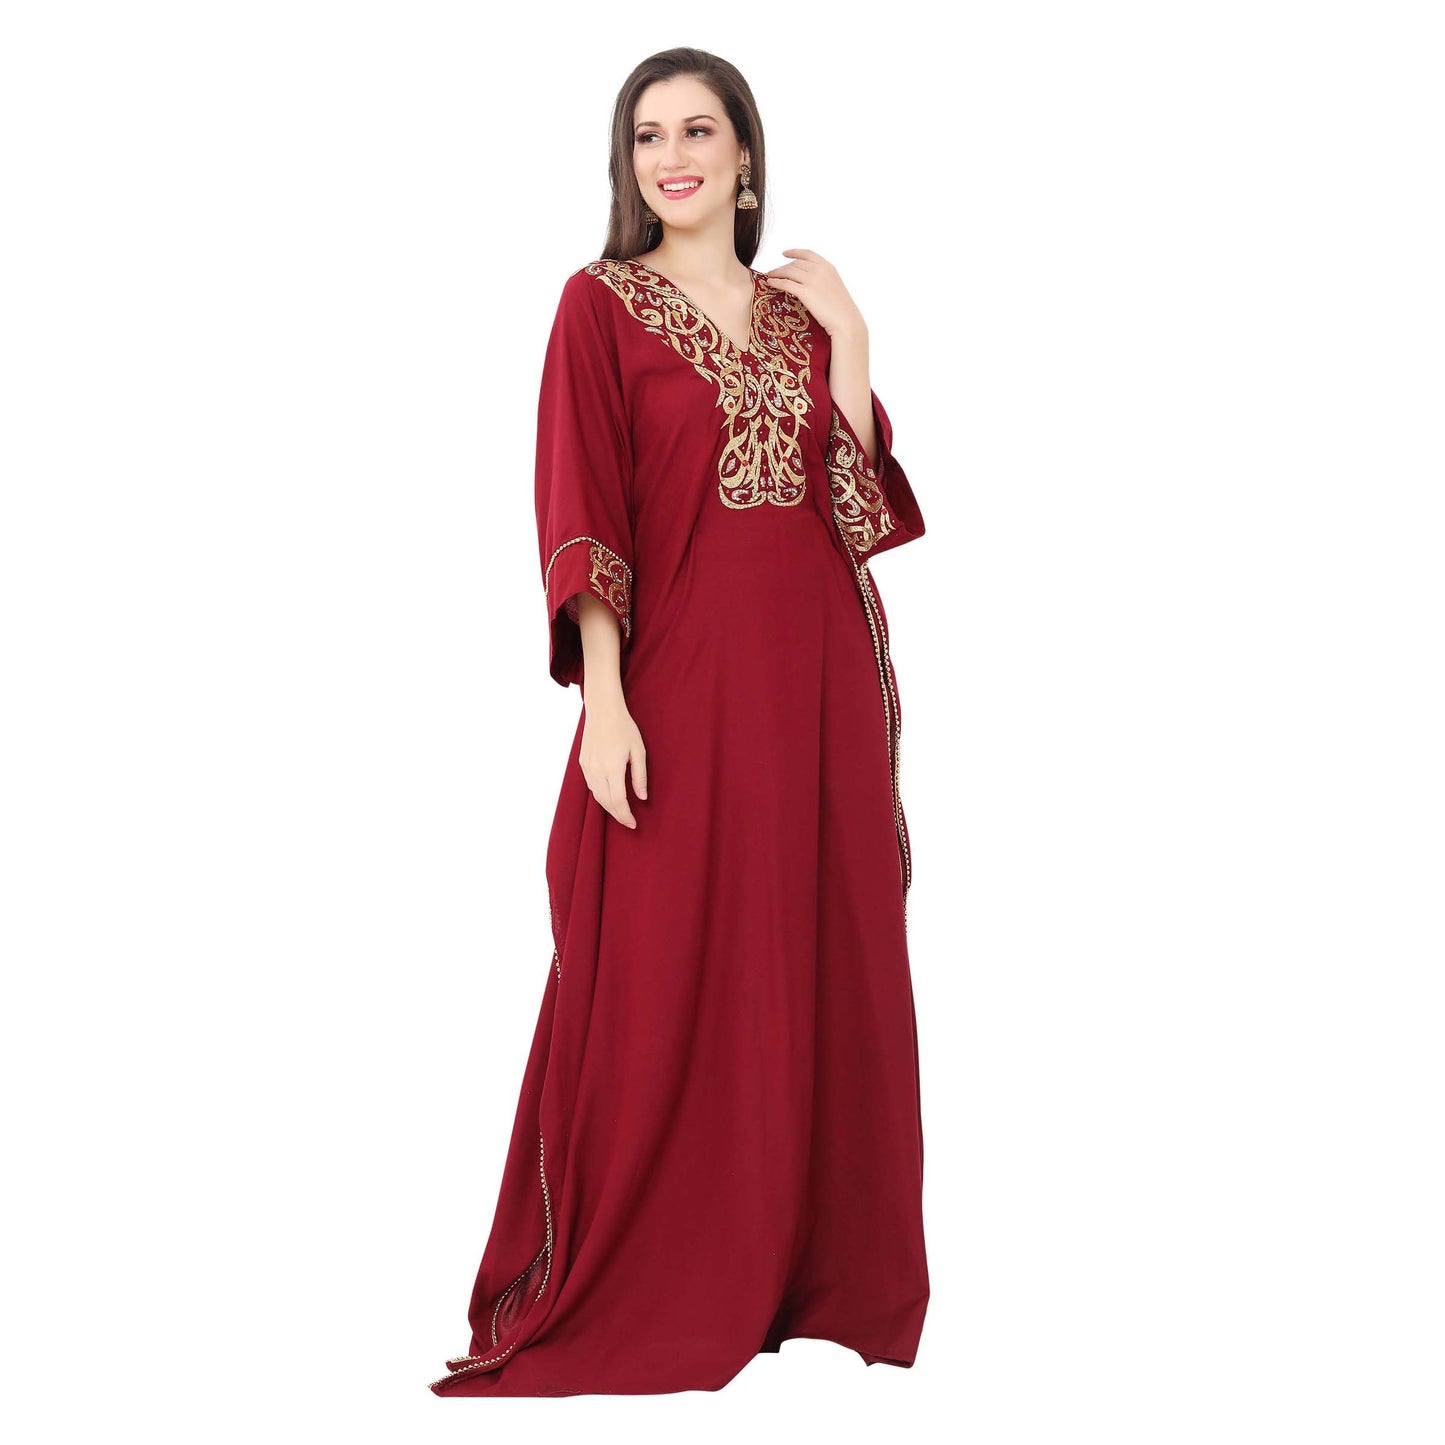 Rust Embroidered Yoke Design Ethnic Gown – Inddus.com